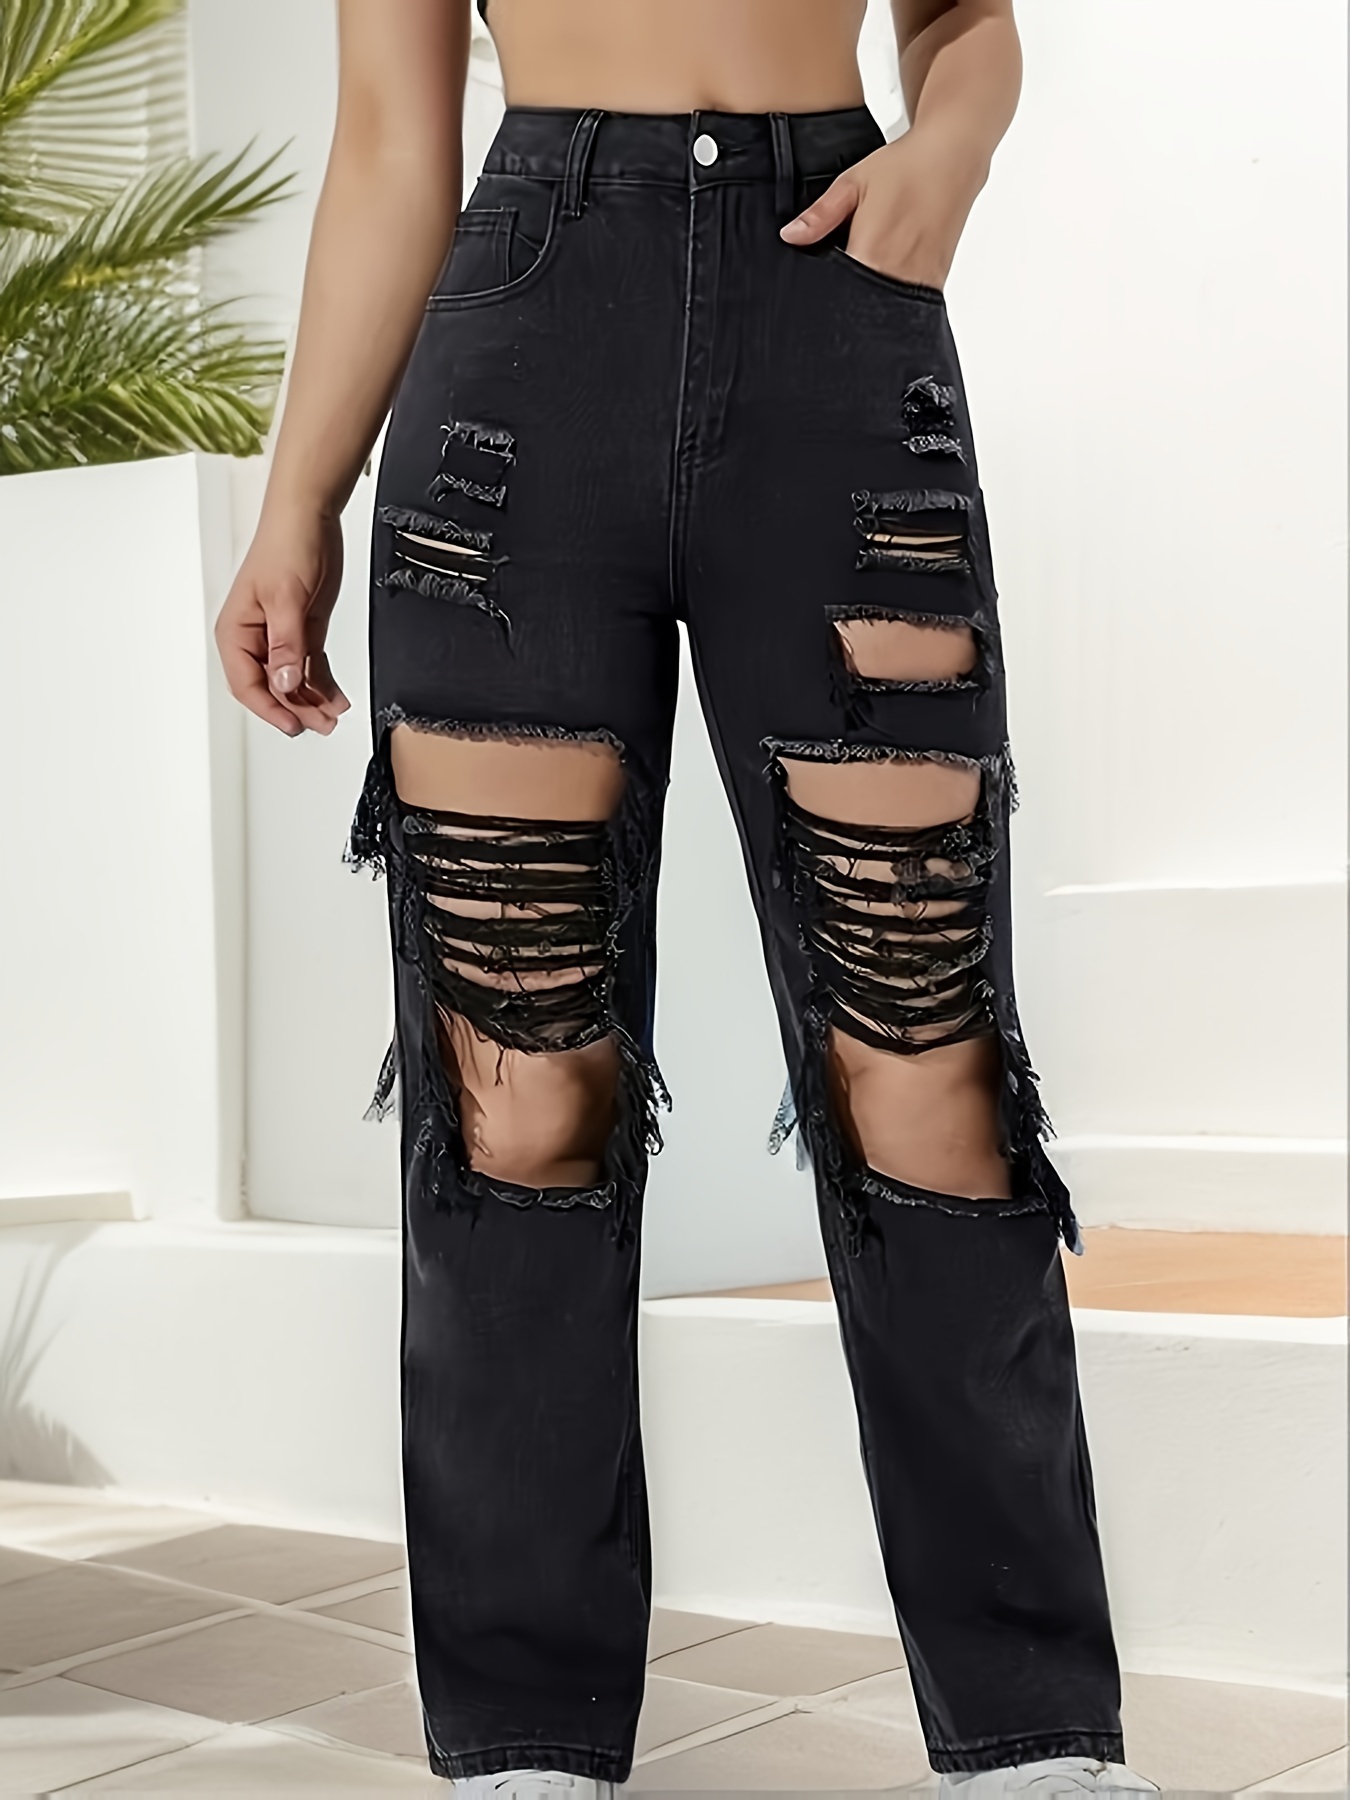 High Rise Distressed High Stretchy Skinny Jeans, High Waist Black Ripped  Denim Pants, Women's Denim Jeans & Clothing